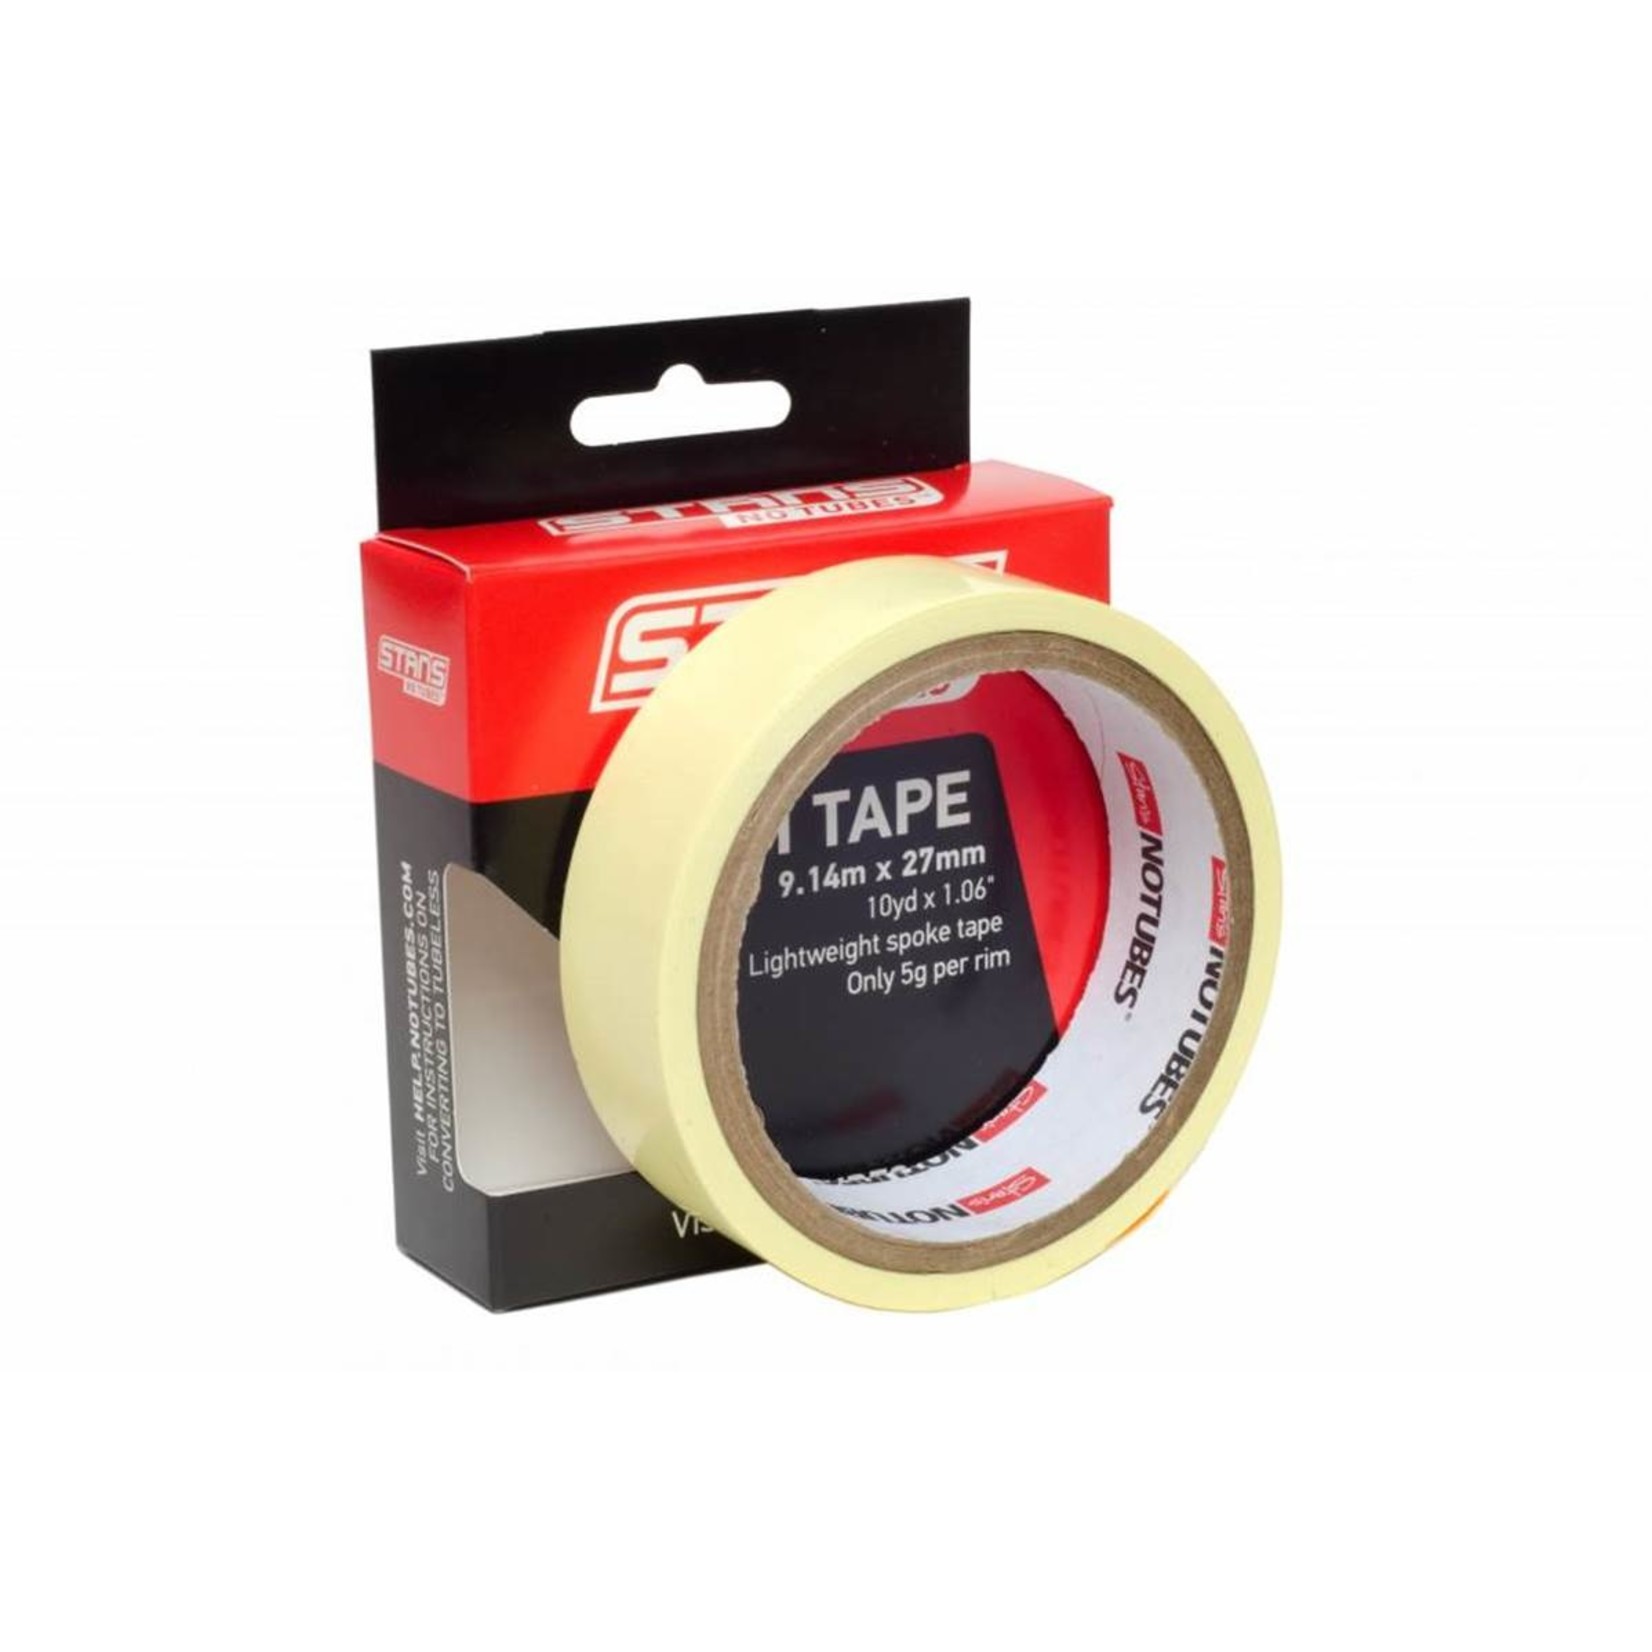 Stans Tubeless Tape 9.14m x 27mm Roll Yellow